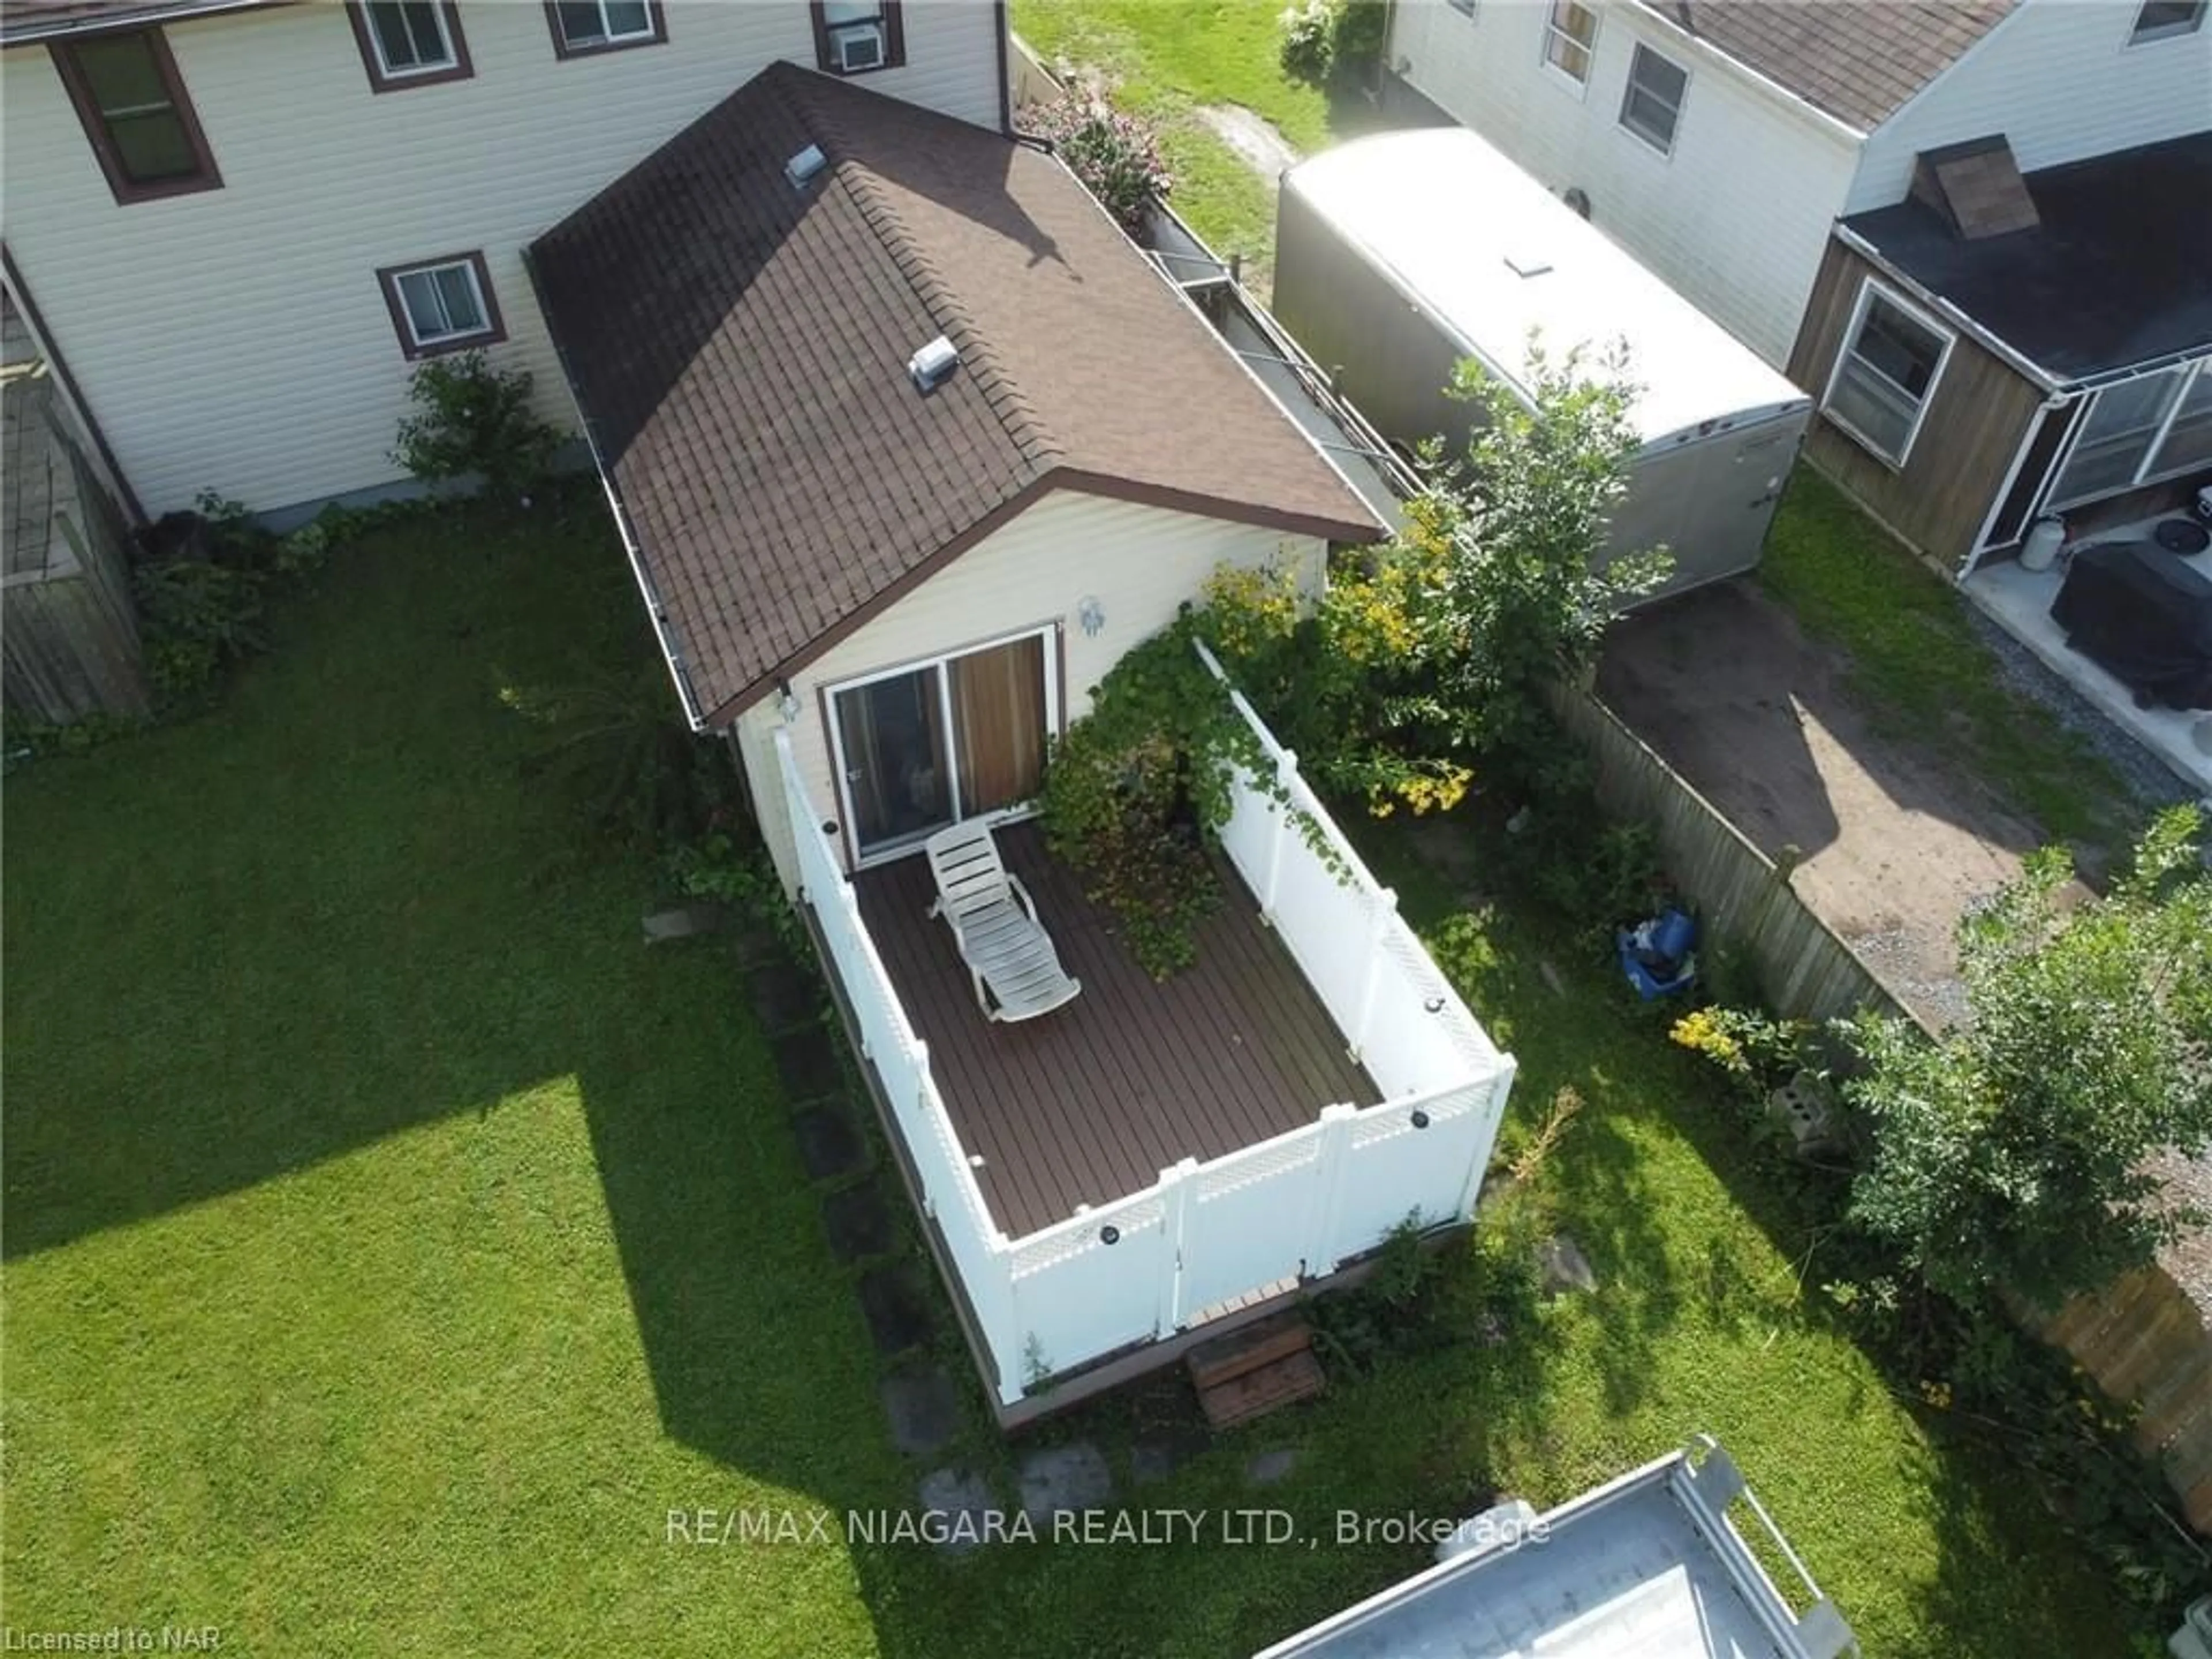 Frontside or backside of a home for 25-27 Gadsby Ave, Welland Ontario L3C 1A8